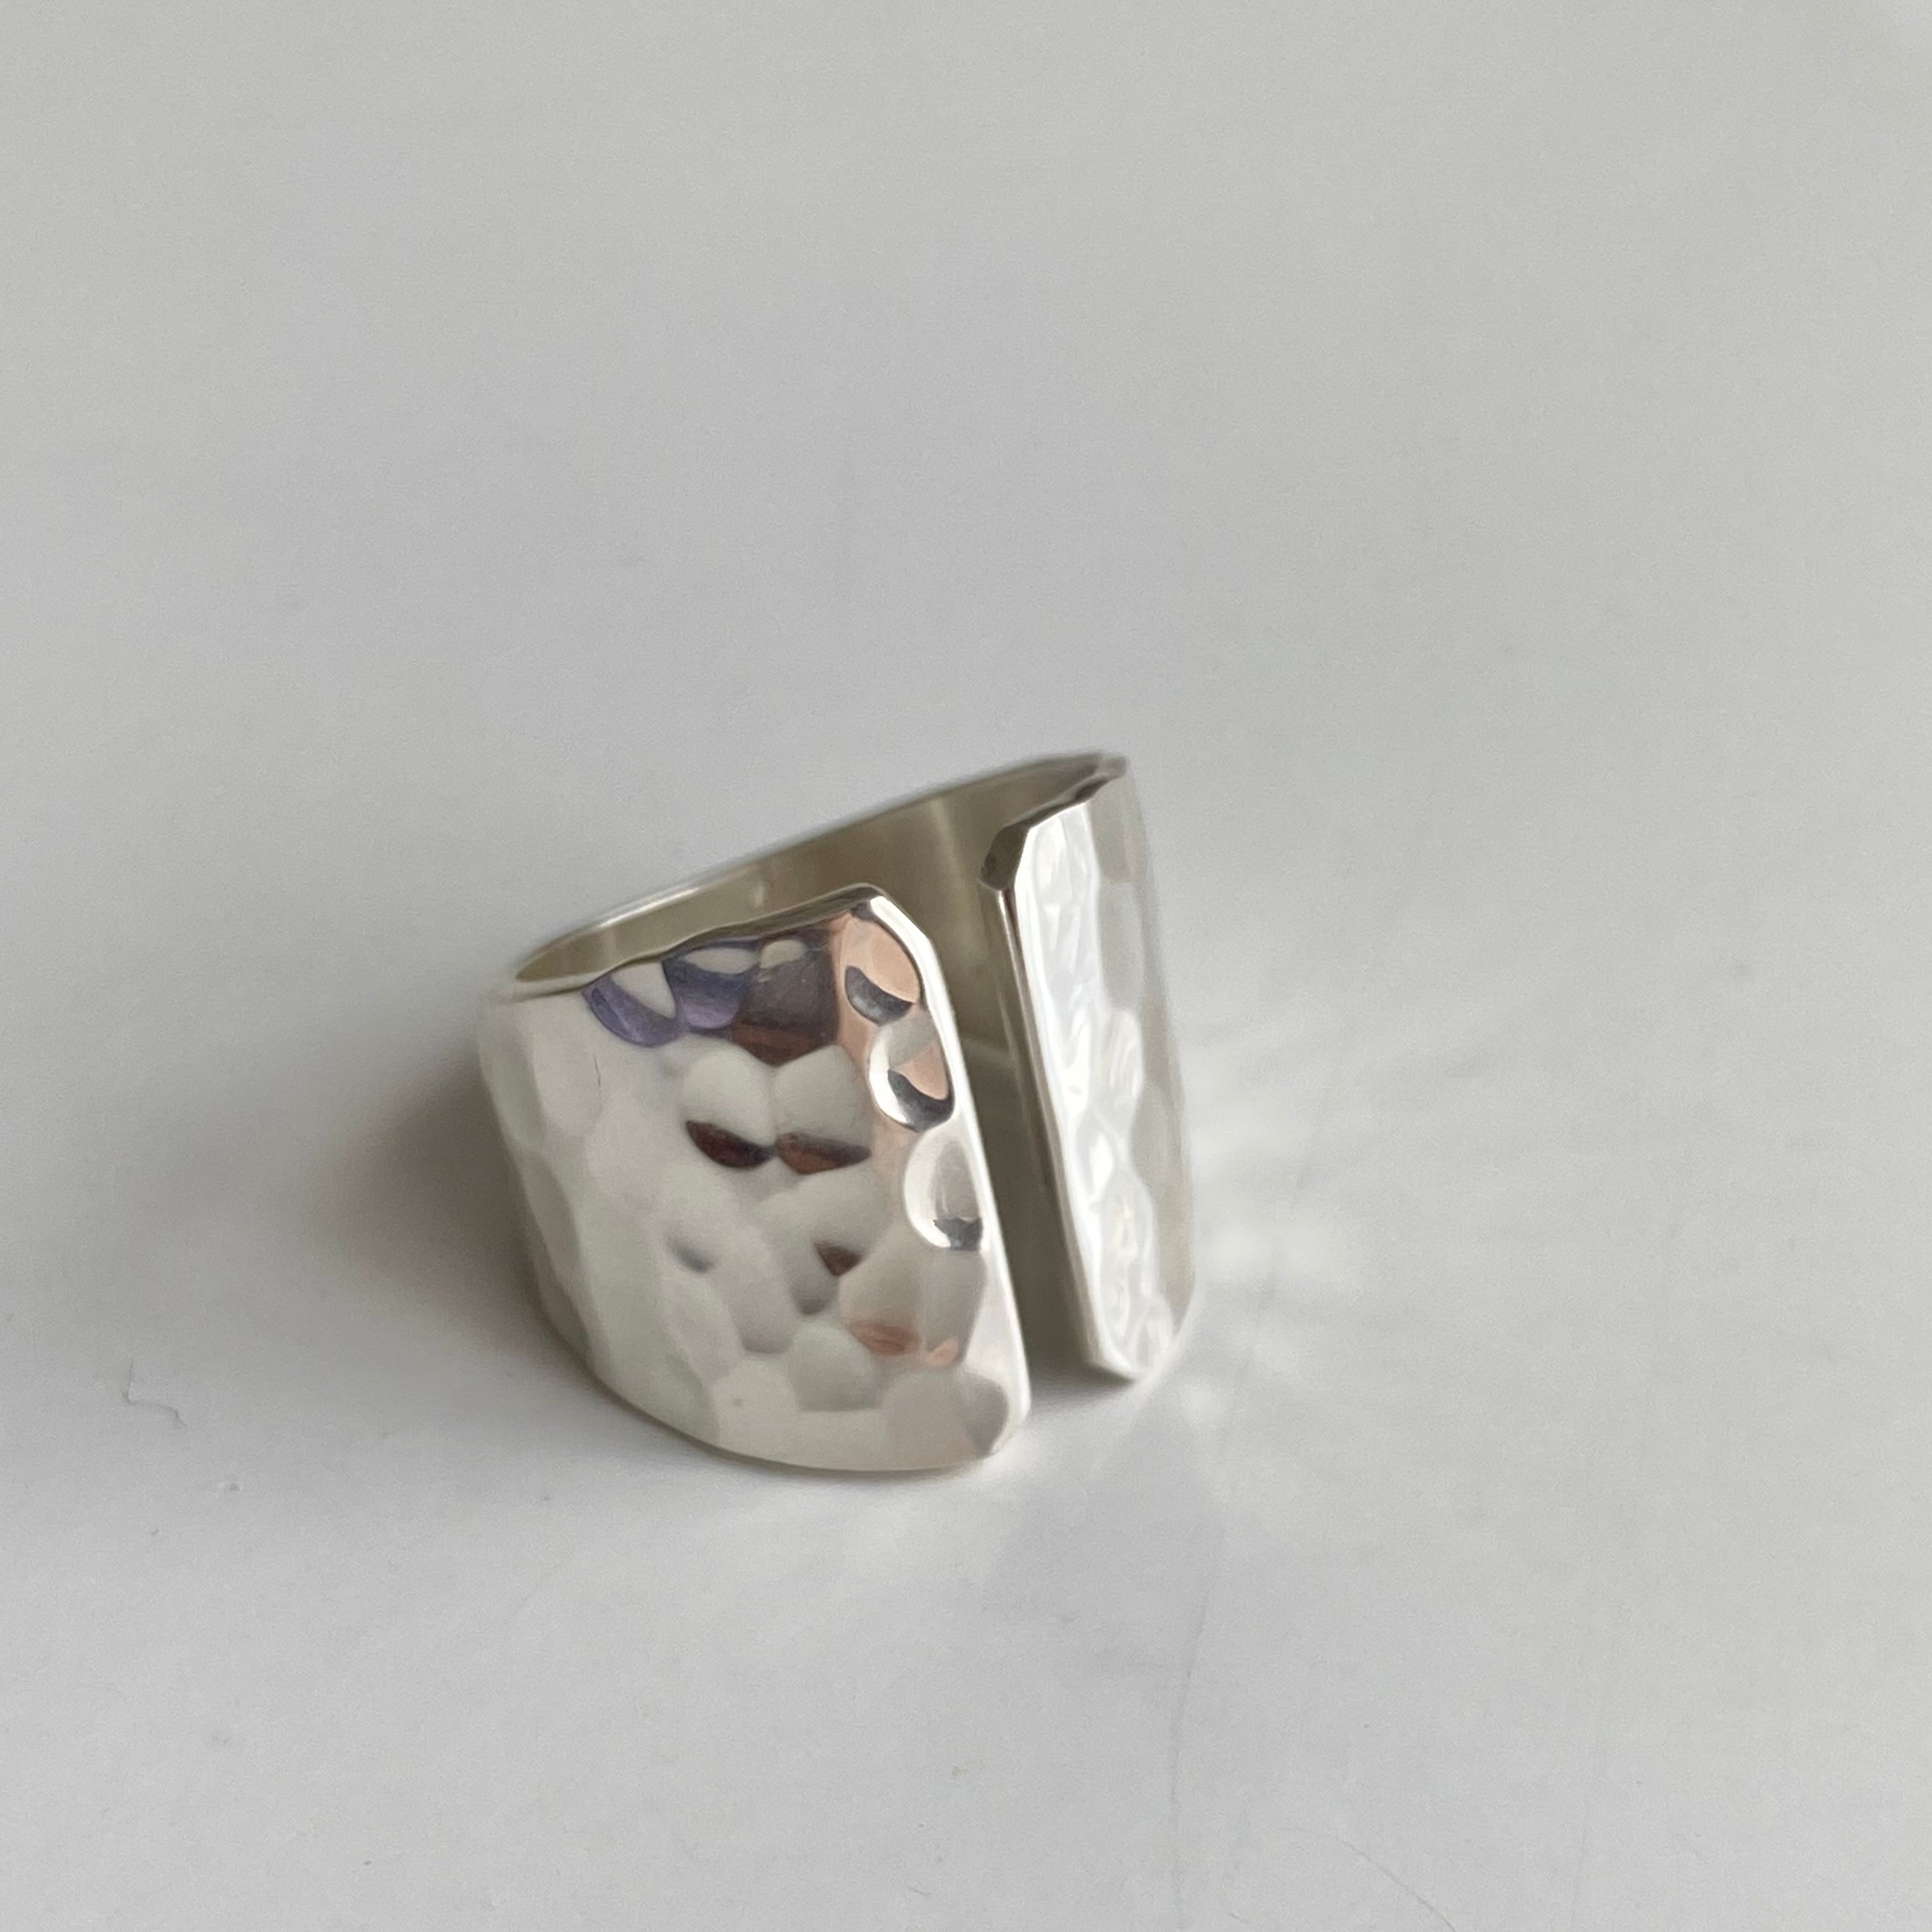 Hammered Texture Sterling Silver Ring with a Gap